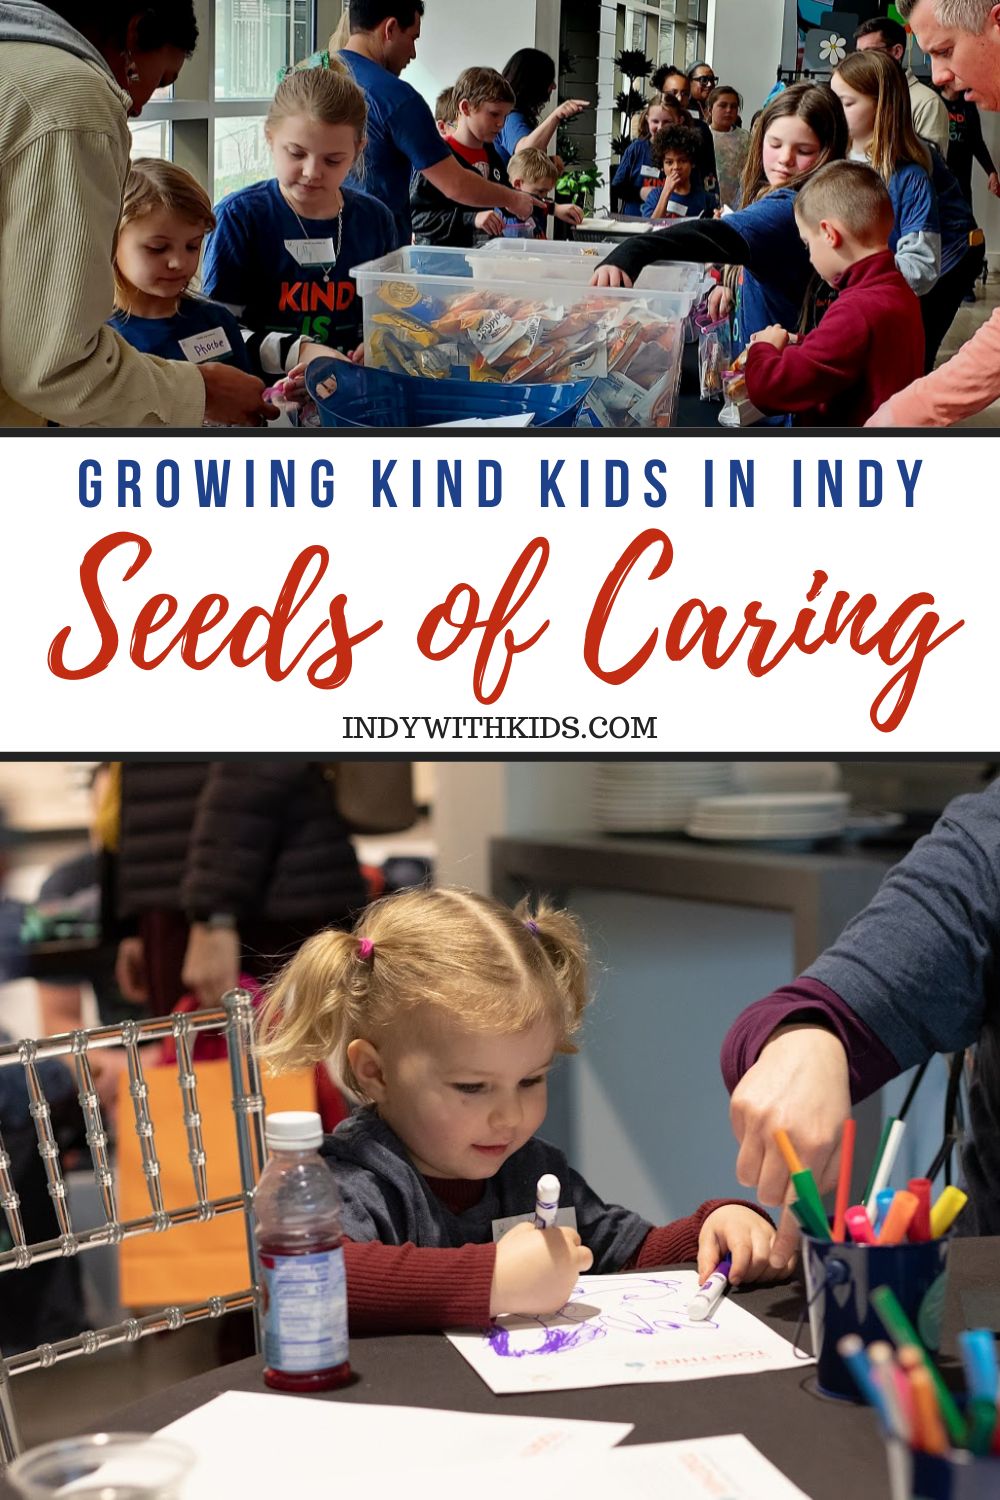 Seeds of Caring teaches kids that being Kind is Cool.